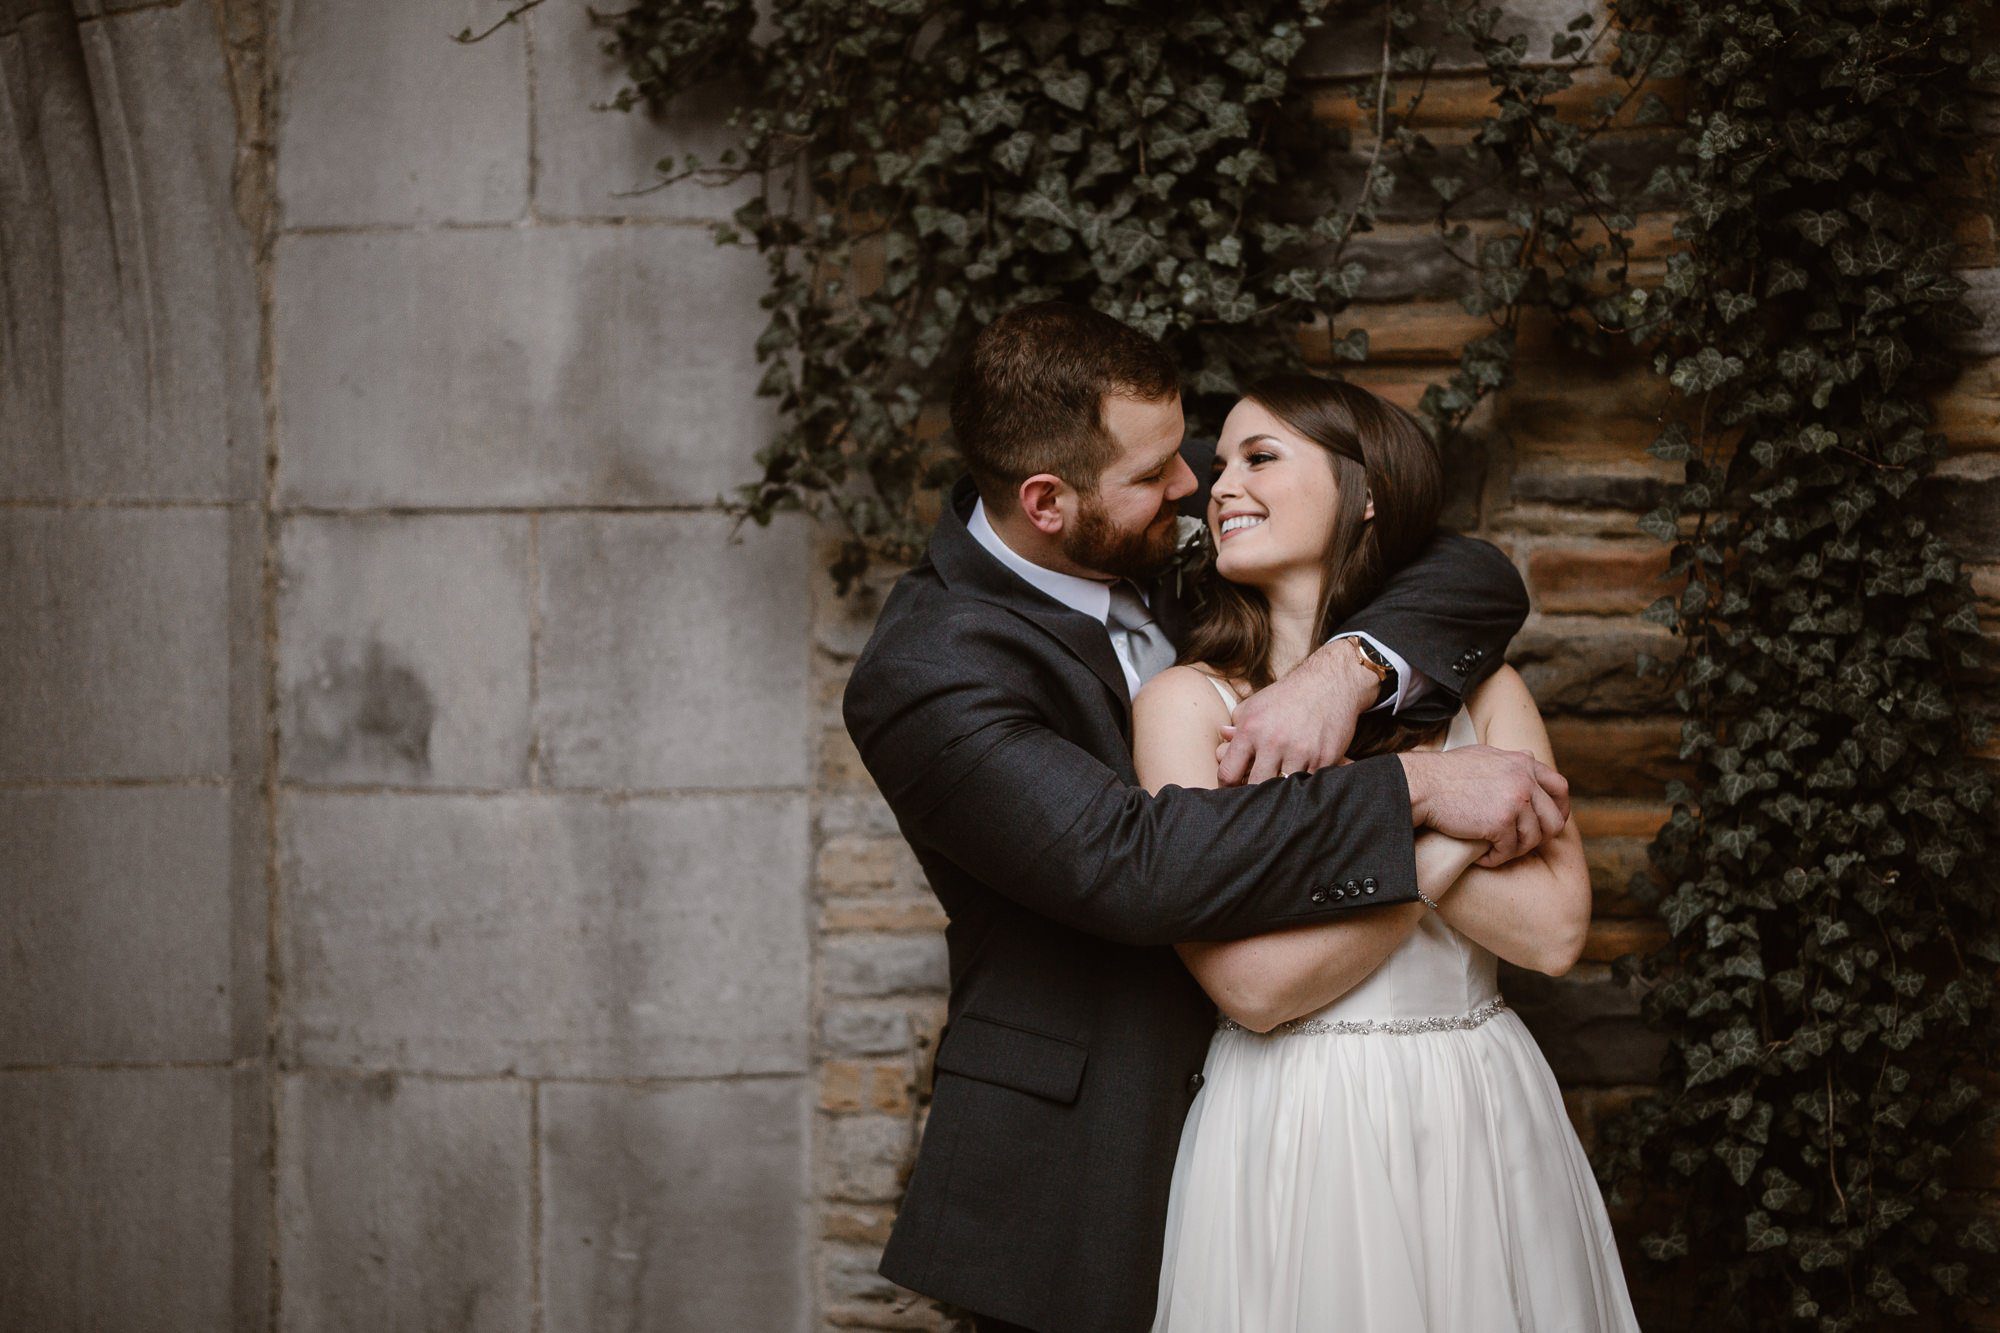 You Budgeted For Your Wedding, But What About Post-Wedding Financial Planning?